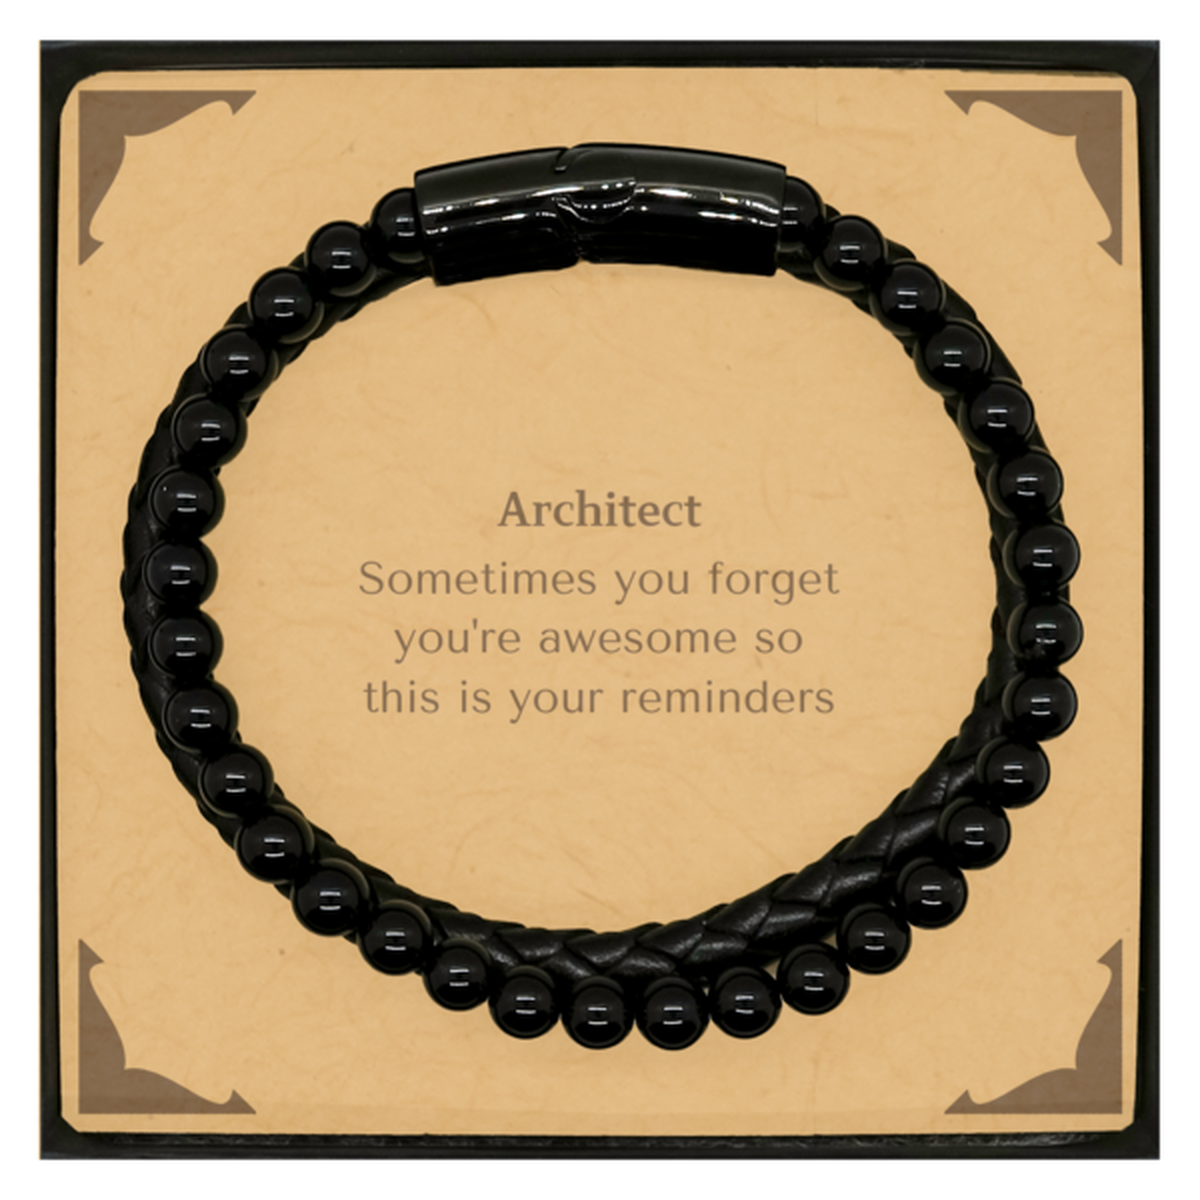 Sentimental Architect Stone Leather Bracelets, Architect Sometimes you forget you're awesome so this is your reminders, Graduation Christmas Birthday Gifts for Architect, Men, Women, Coworkers